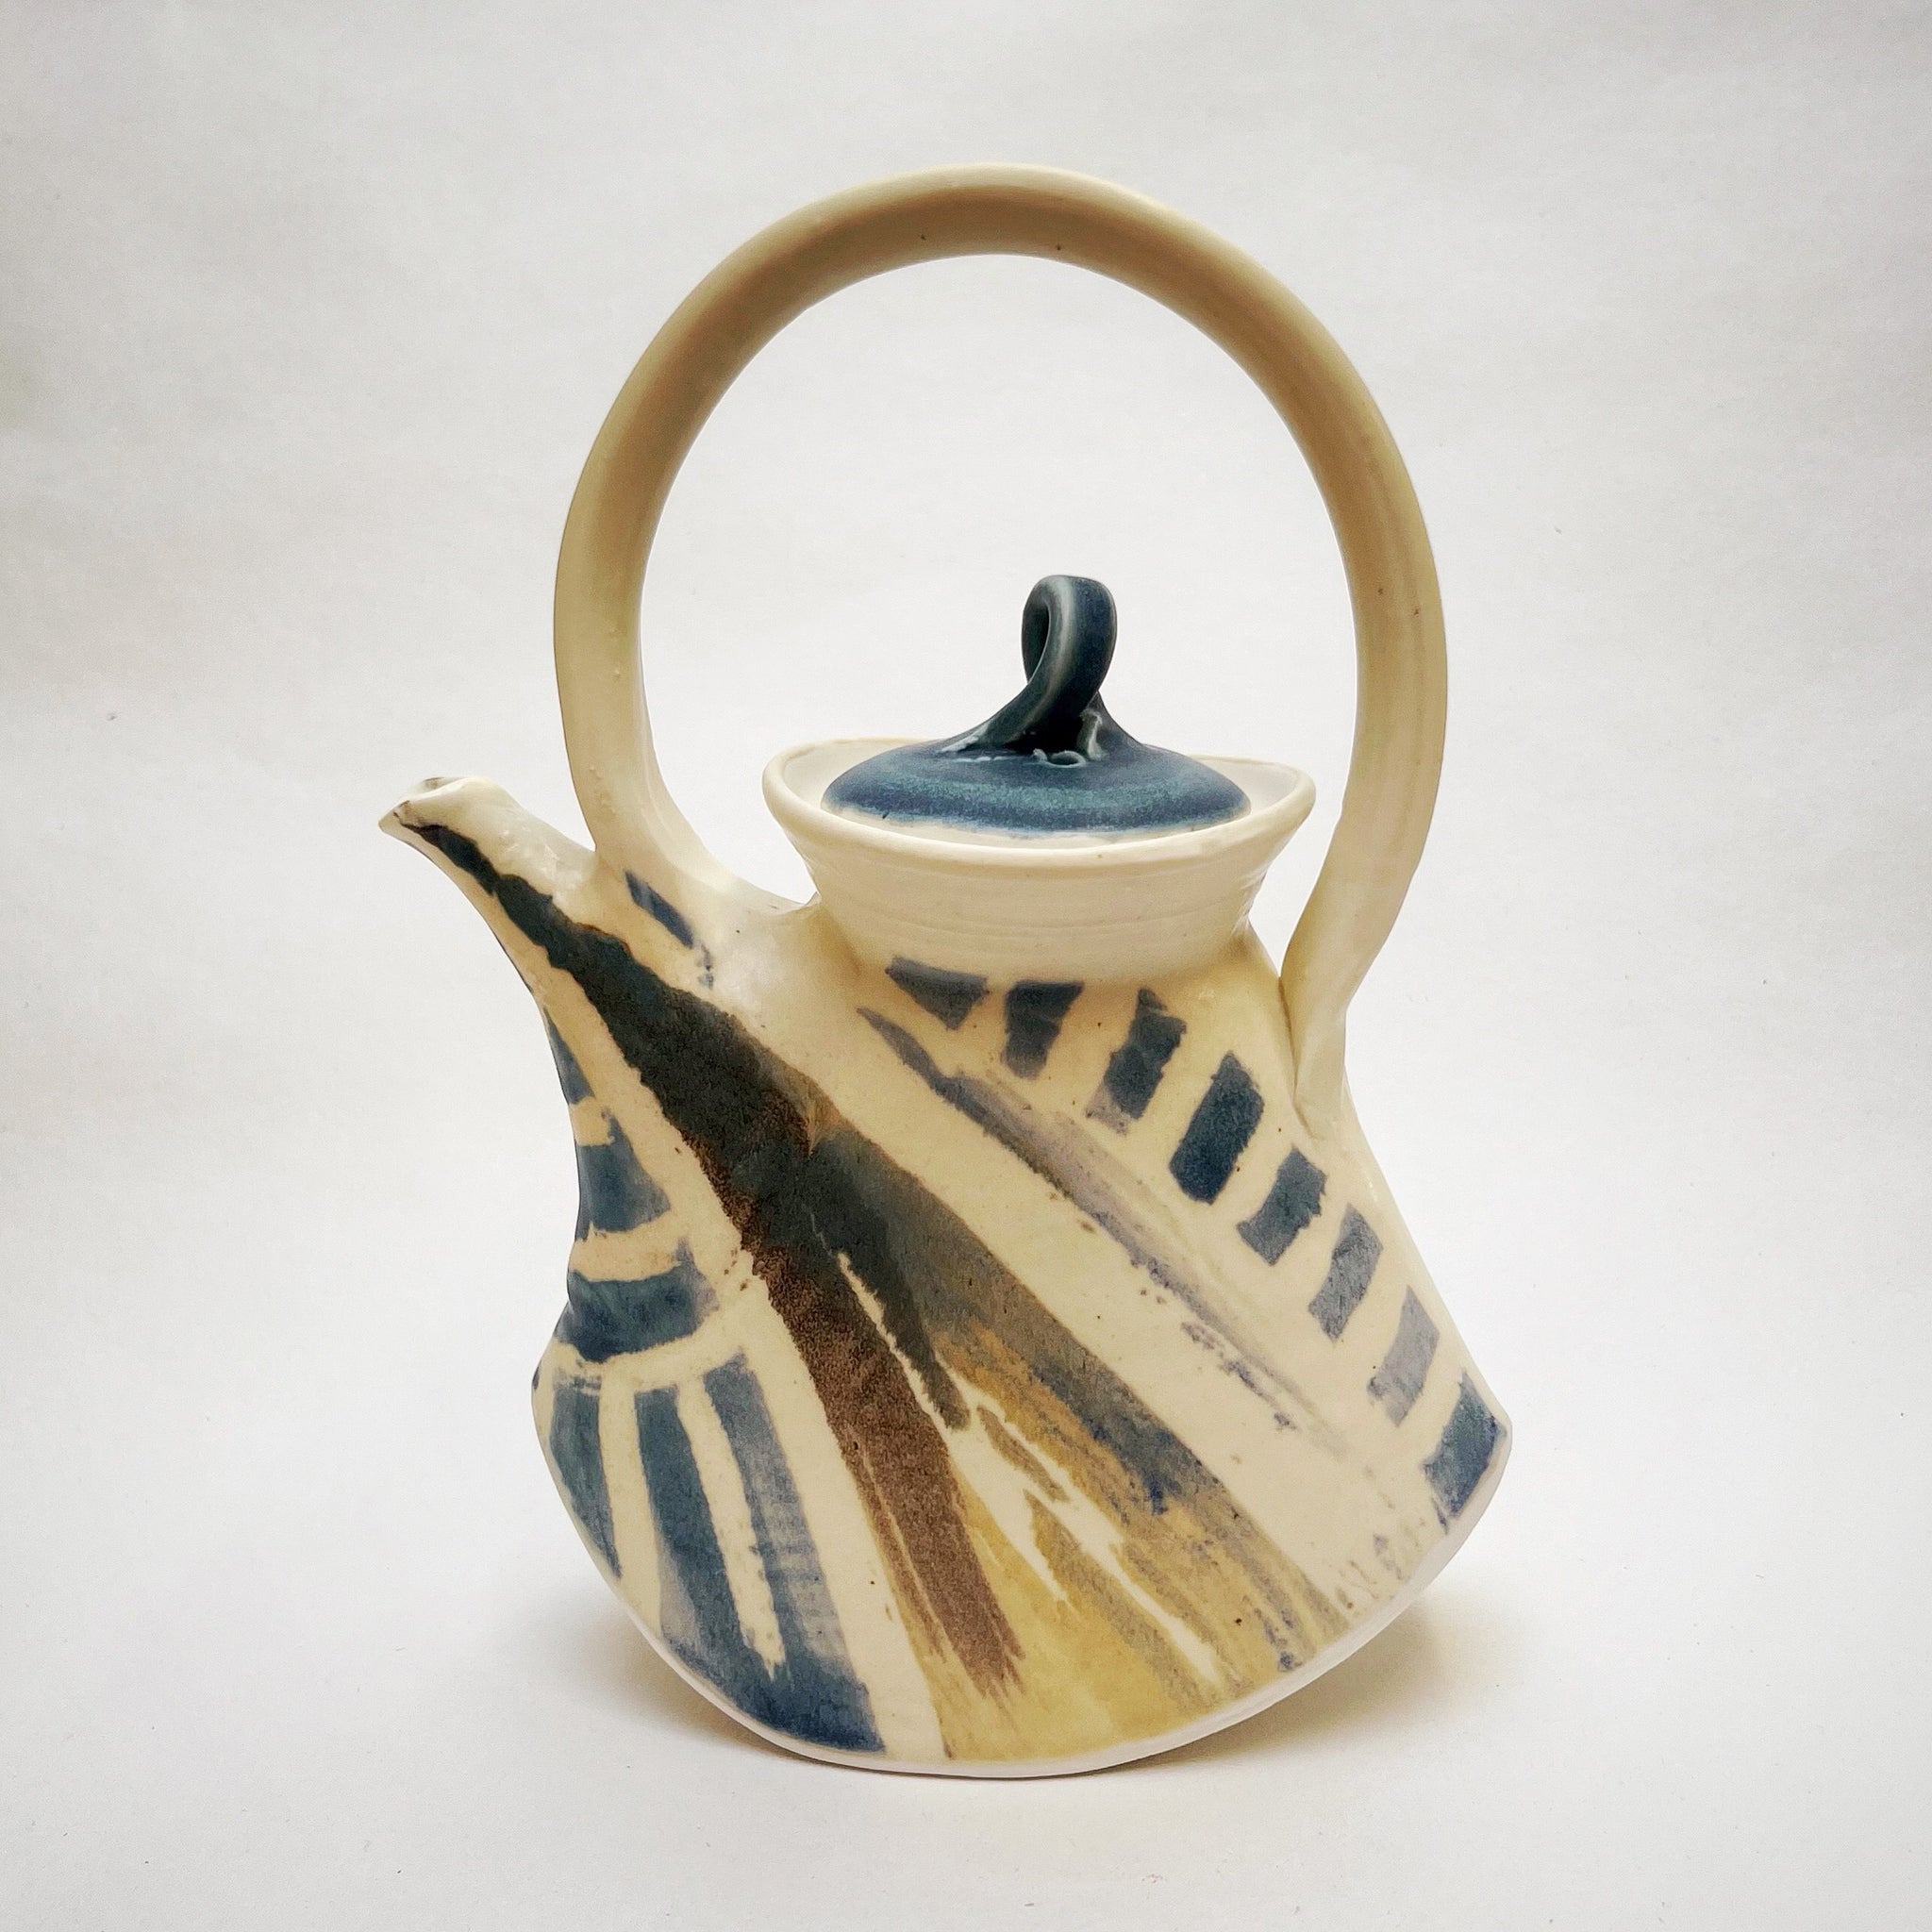 boat teapot - SOLD